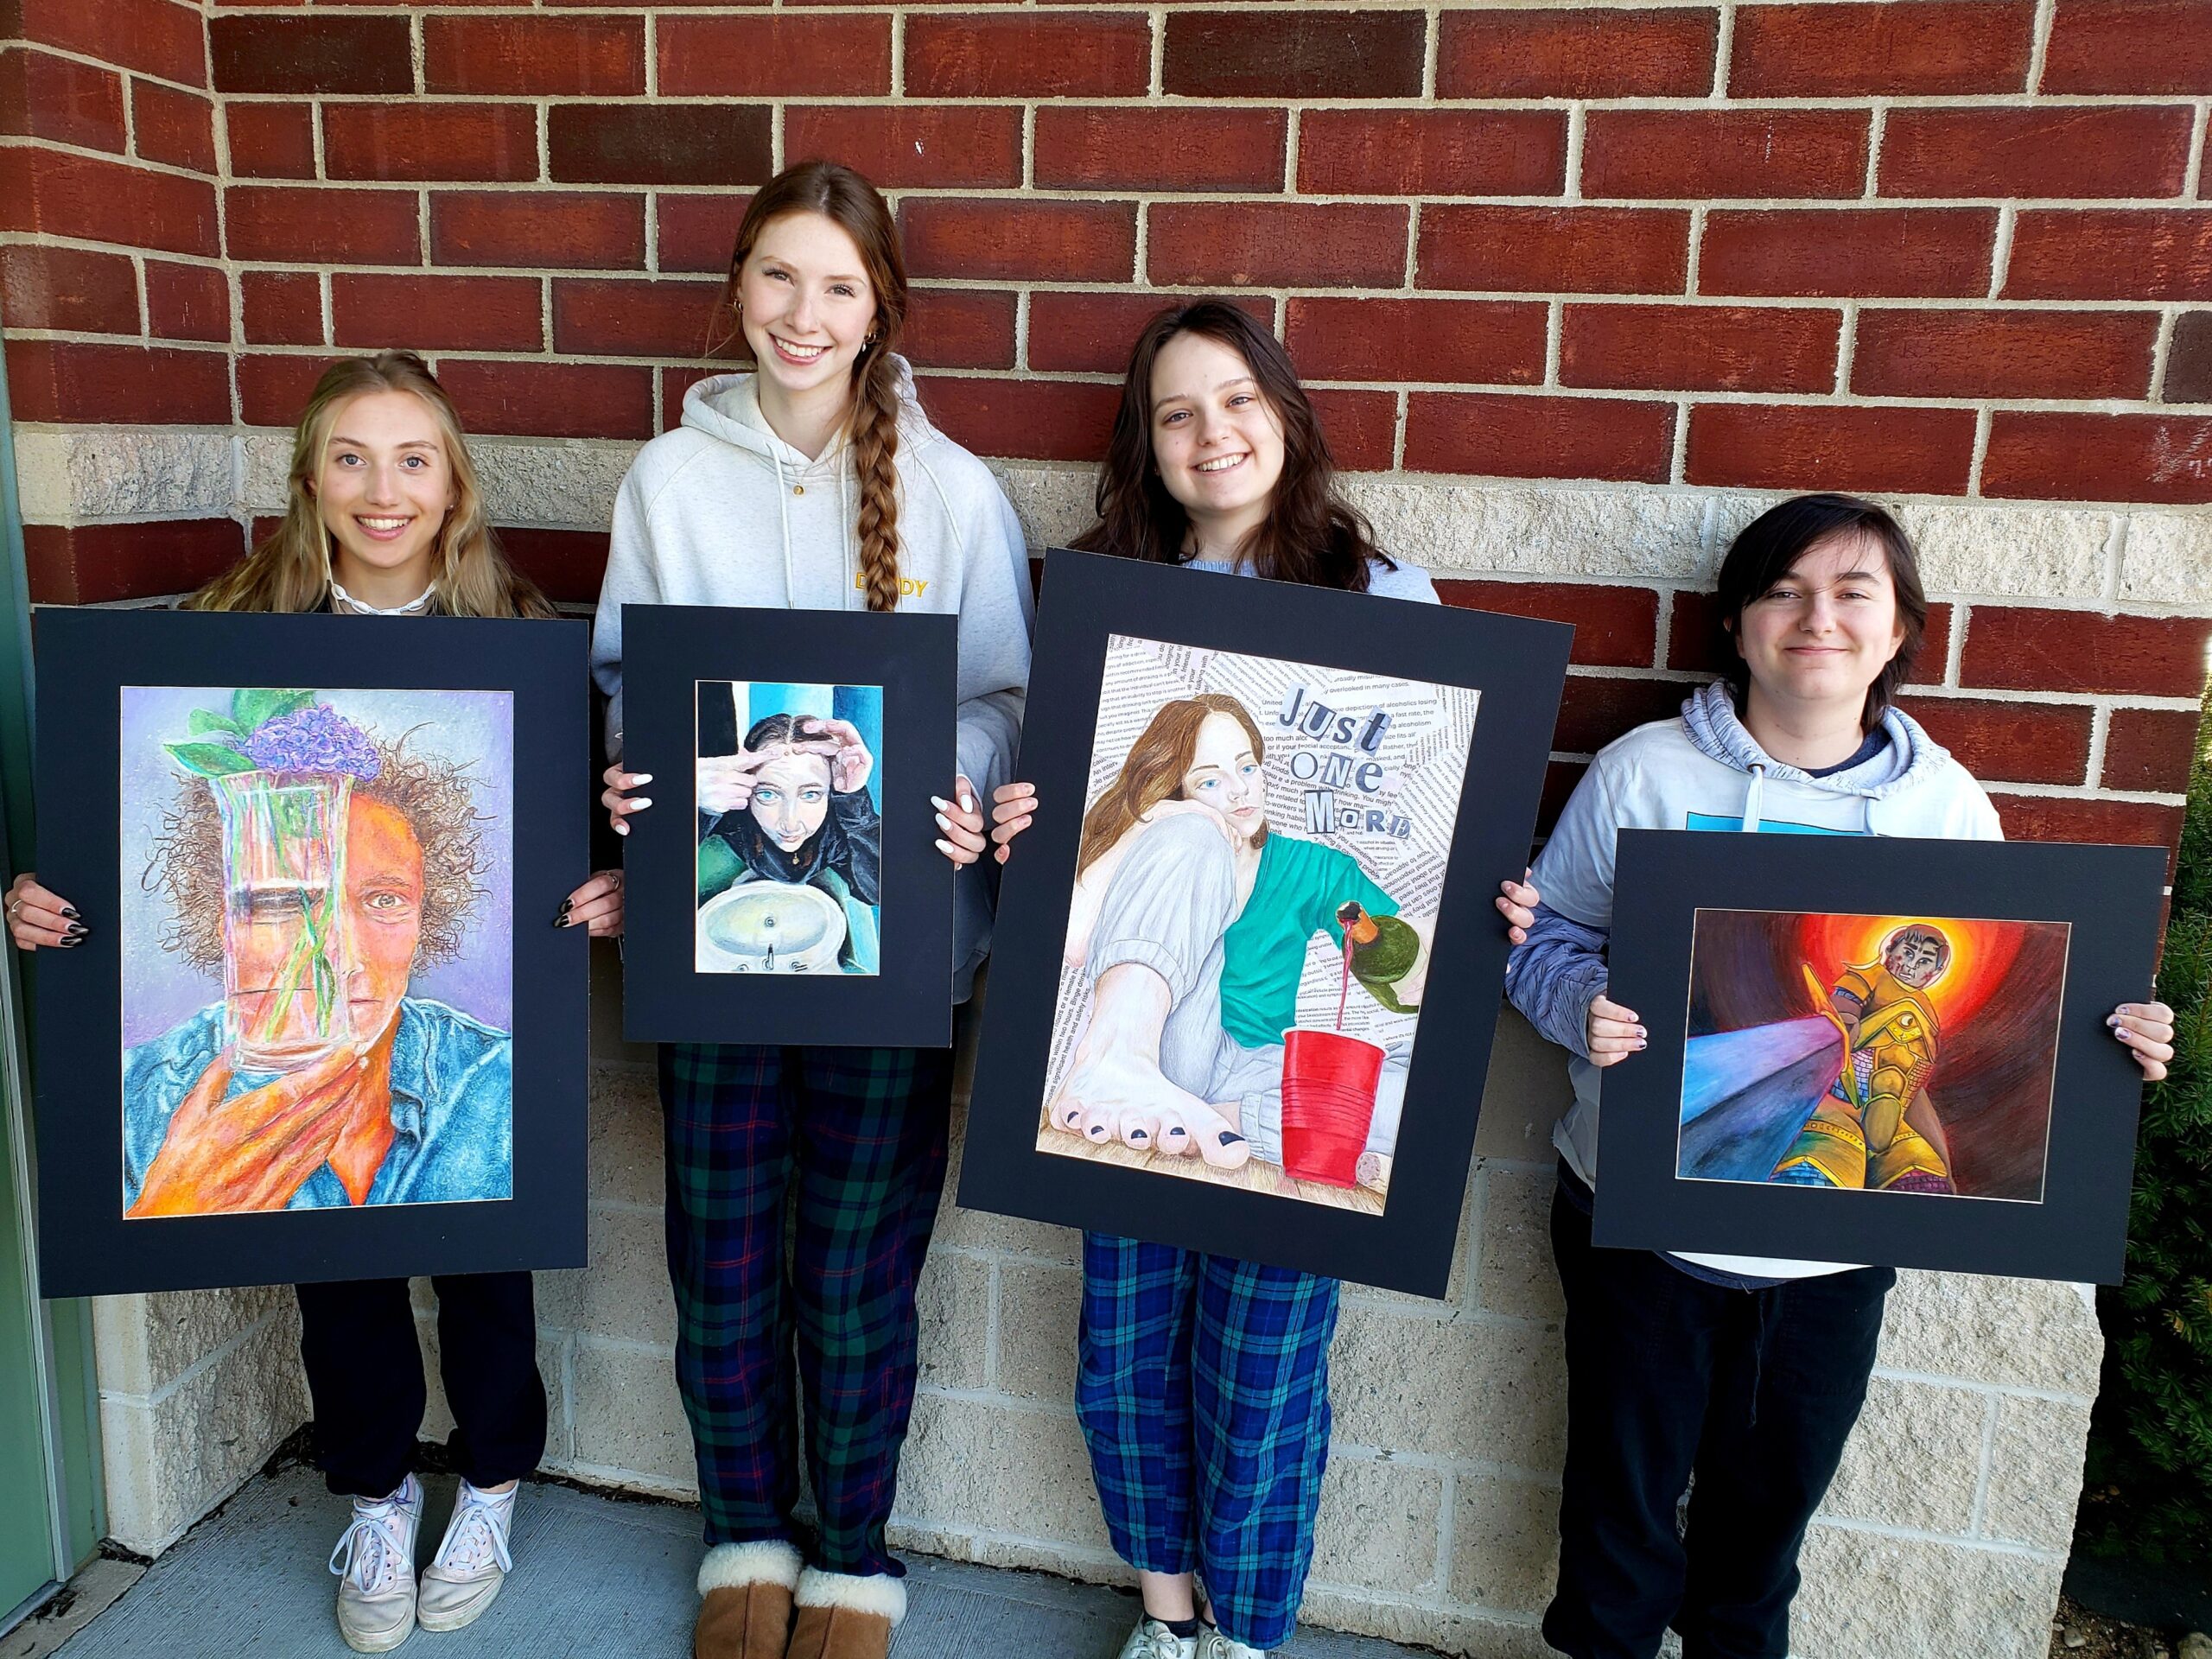 Students at Eastport-South Manor Jr.-Sr. High School, including, from left, Grace Rocchetta,
Reagan Walsh, Keira Bree and Sian Callahan, will exhibit their works at the Parrish Art Museum’s annual student exhibition. The exhibit is open until April 16. COURTESY EASTPORT-SOUTH MANOR SCHOOL DISTRICT